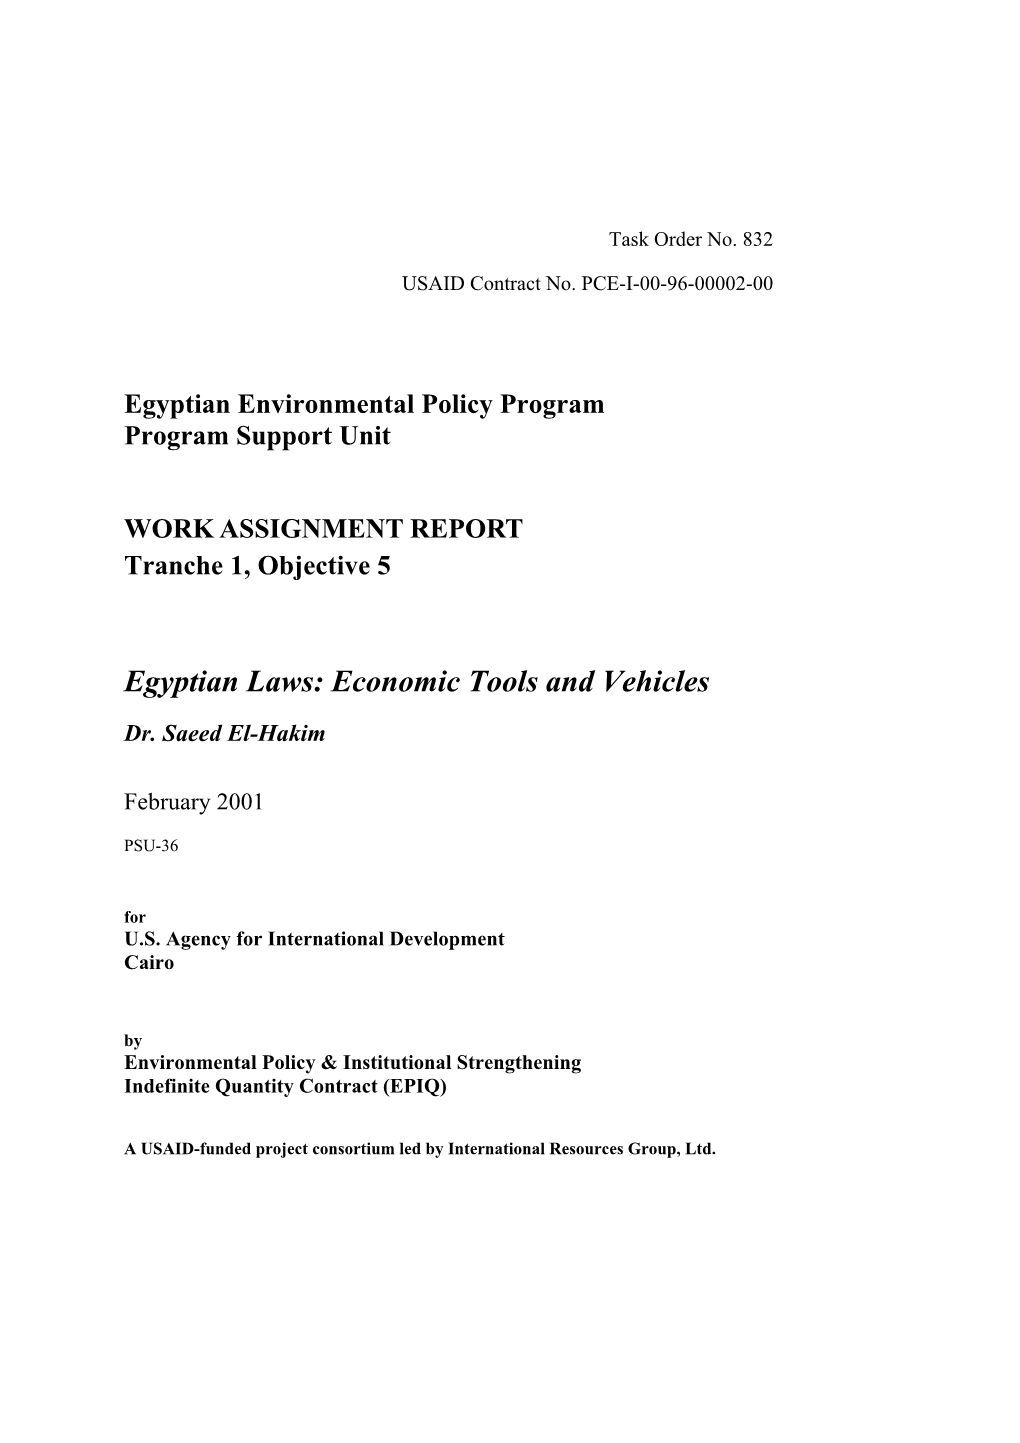 Egyptian Laws: Economic Tools and Vehicles